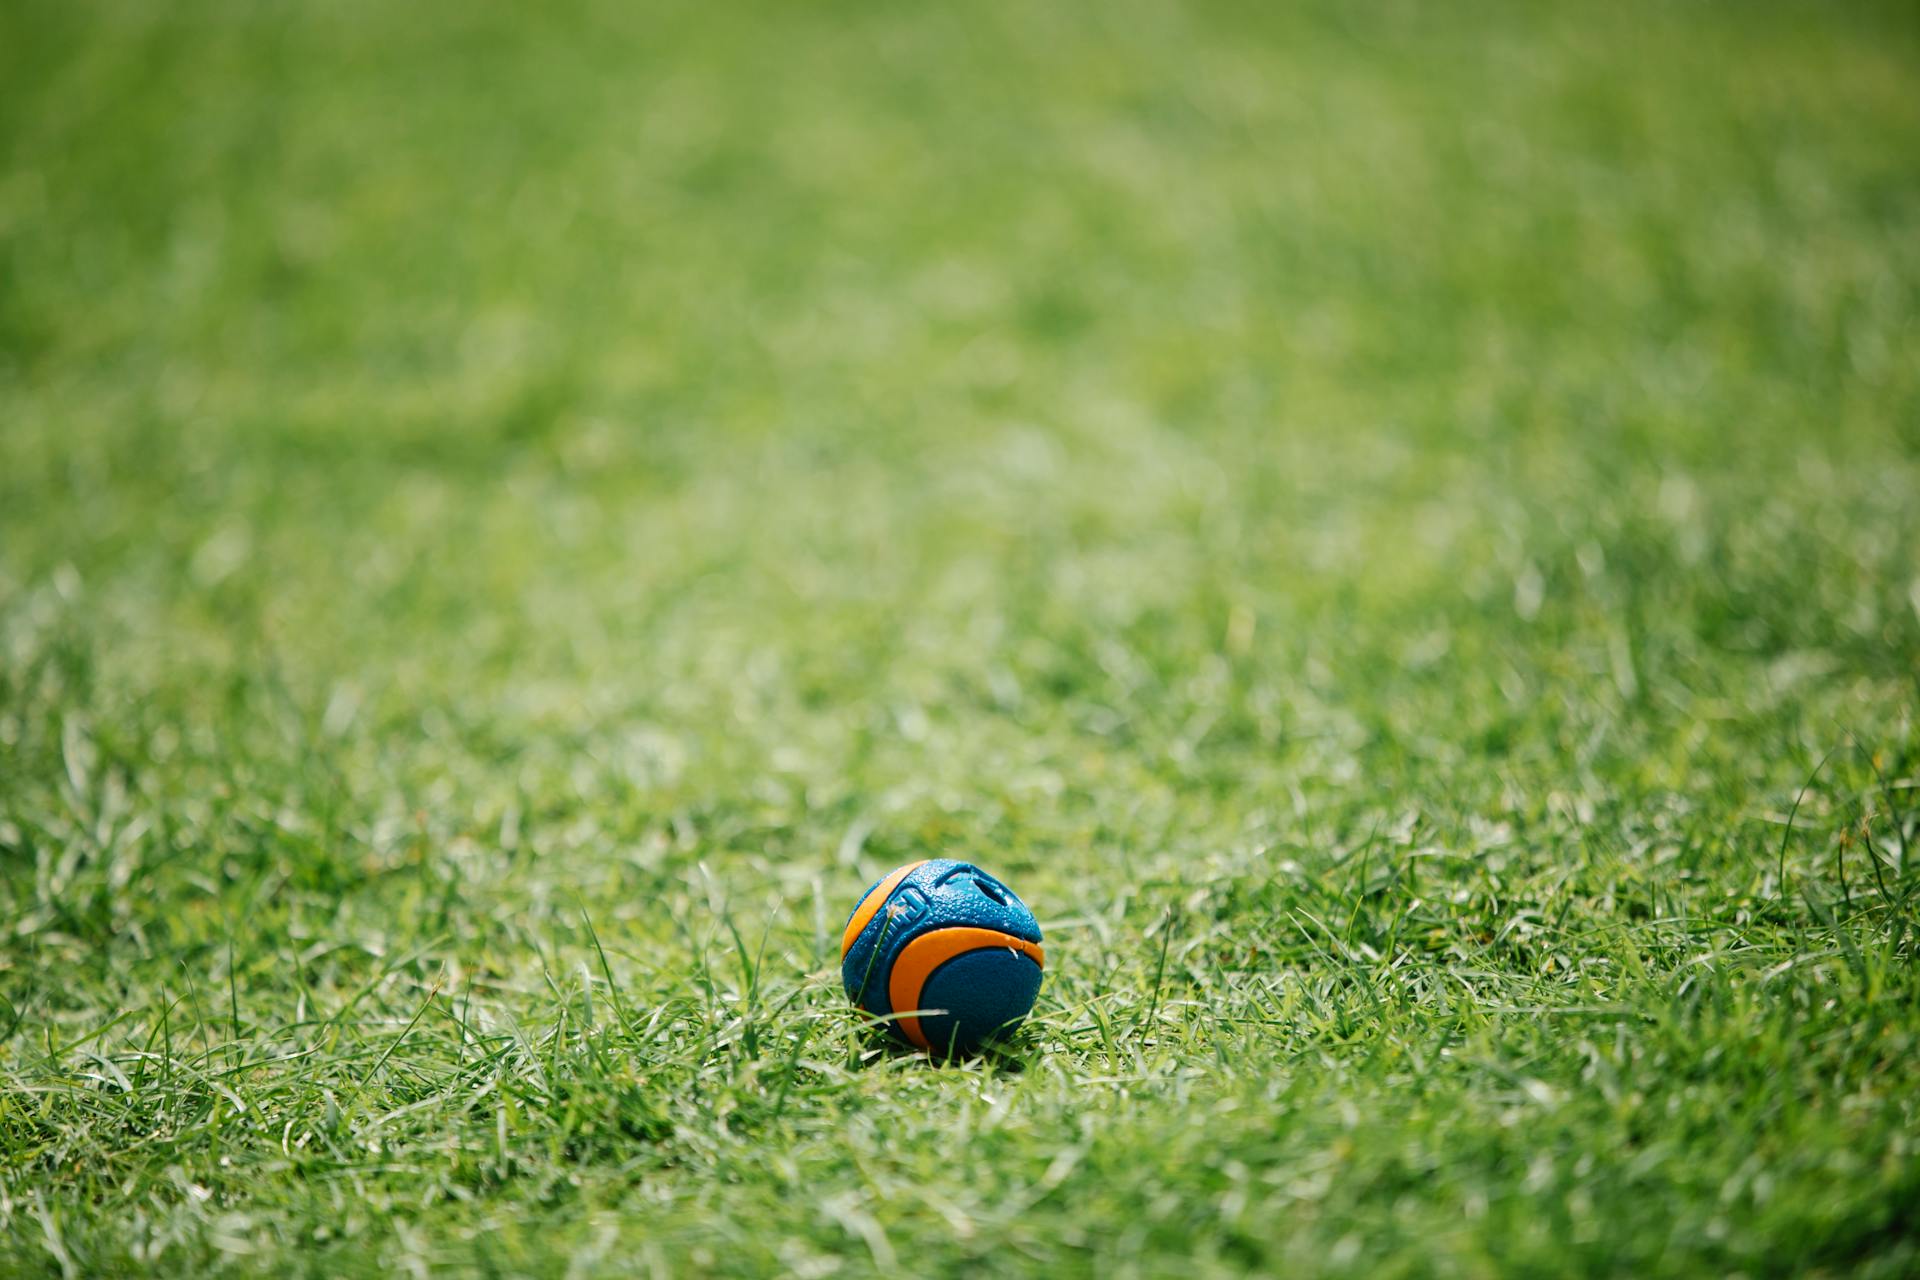 Blue and yellow ball on green grass